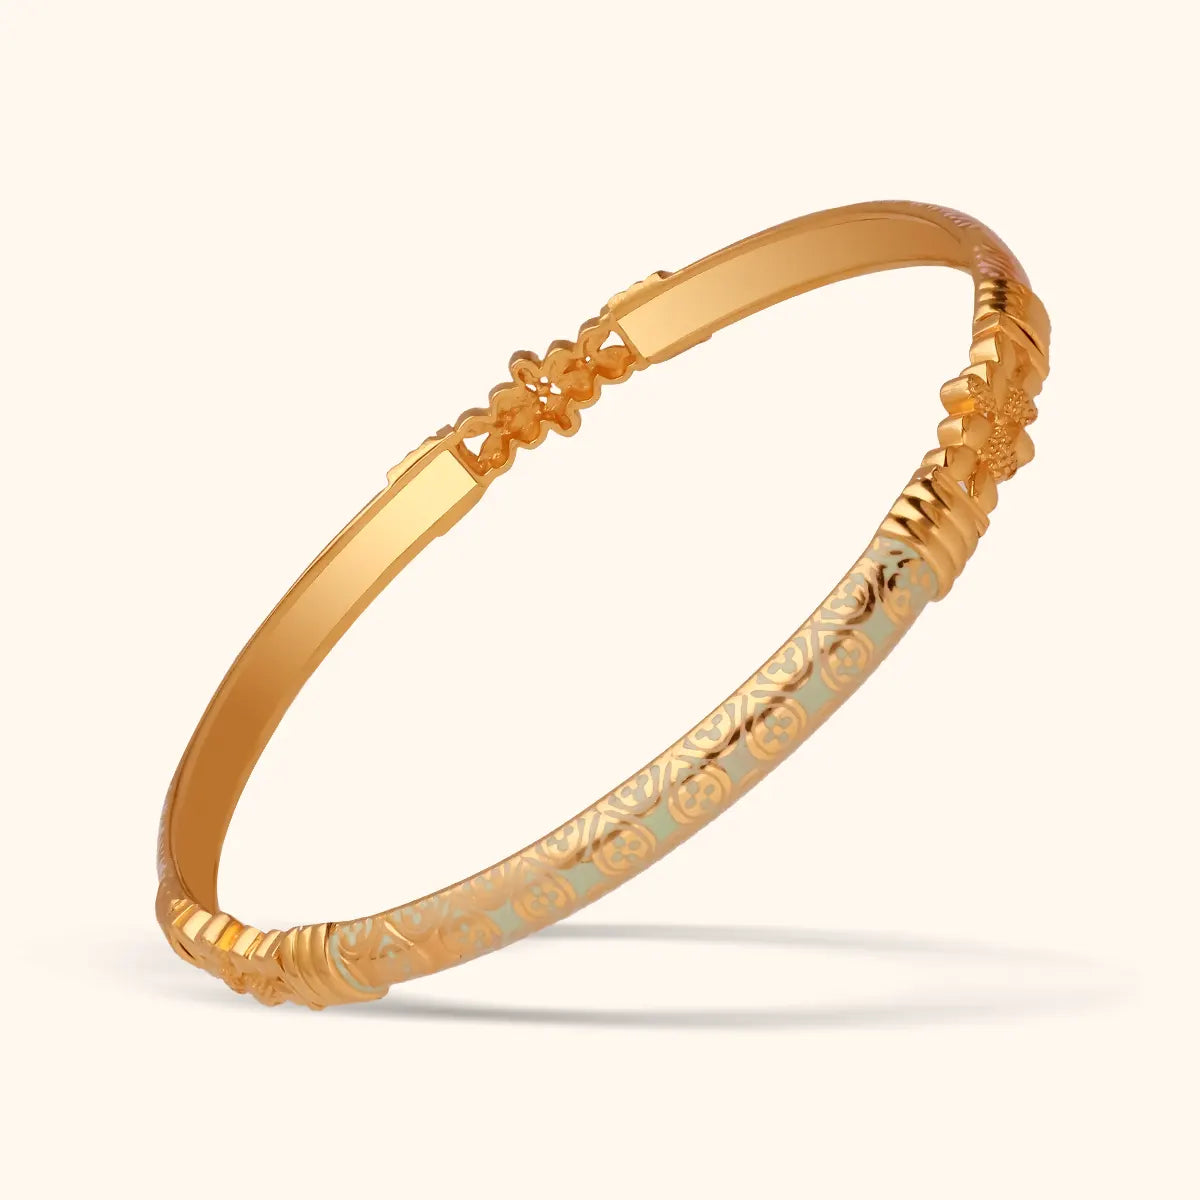 Mens Gold Bracelet: How Much Do They Cost? | 6 Ice - 6 ICE